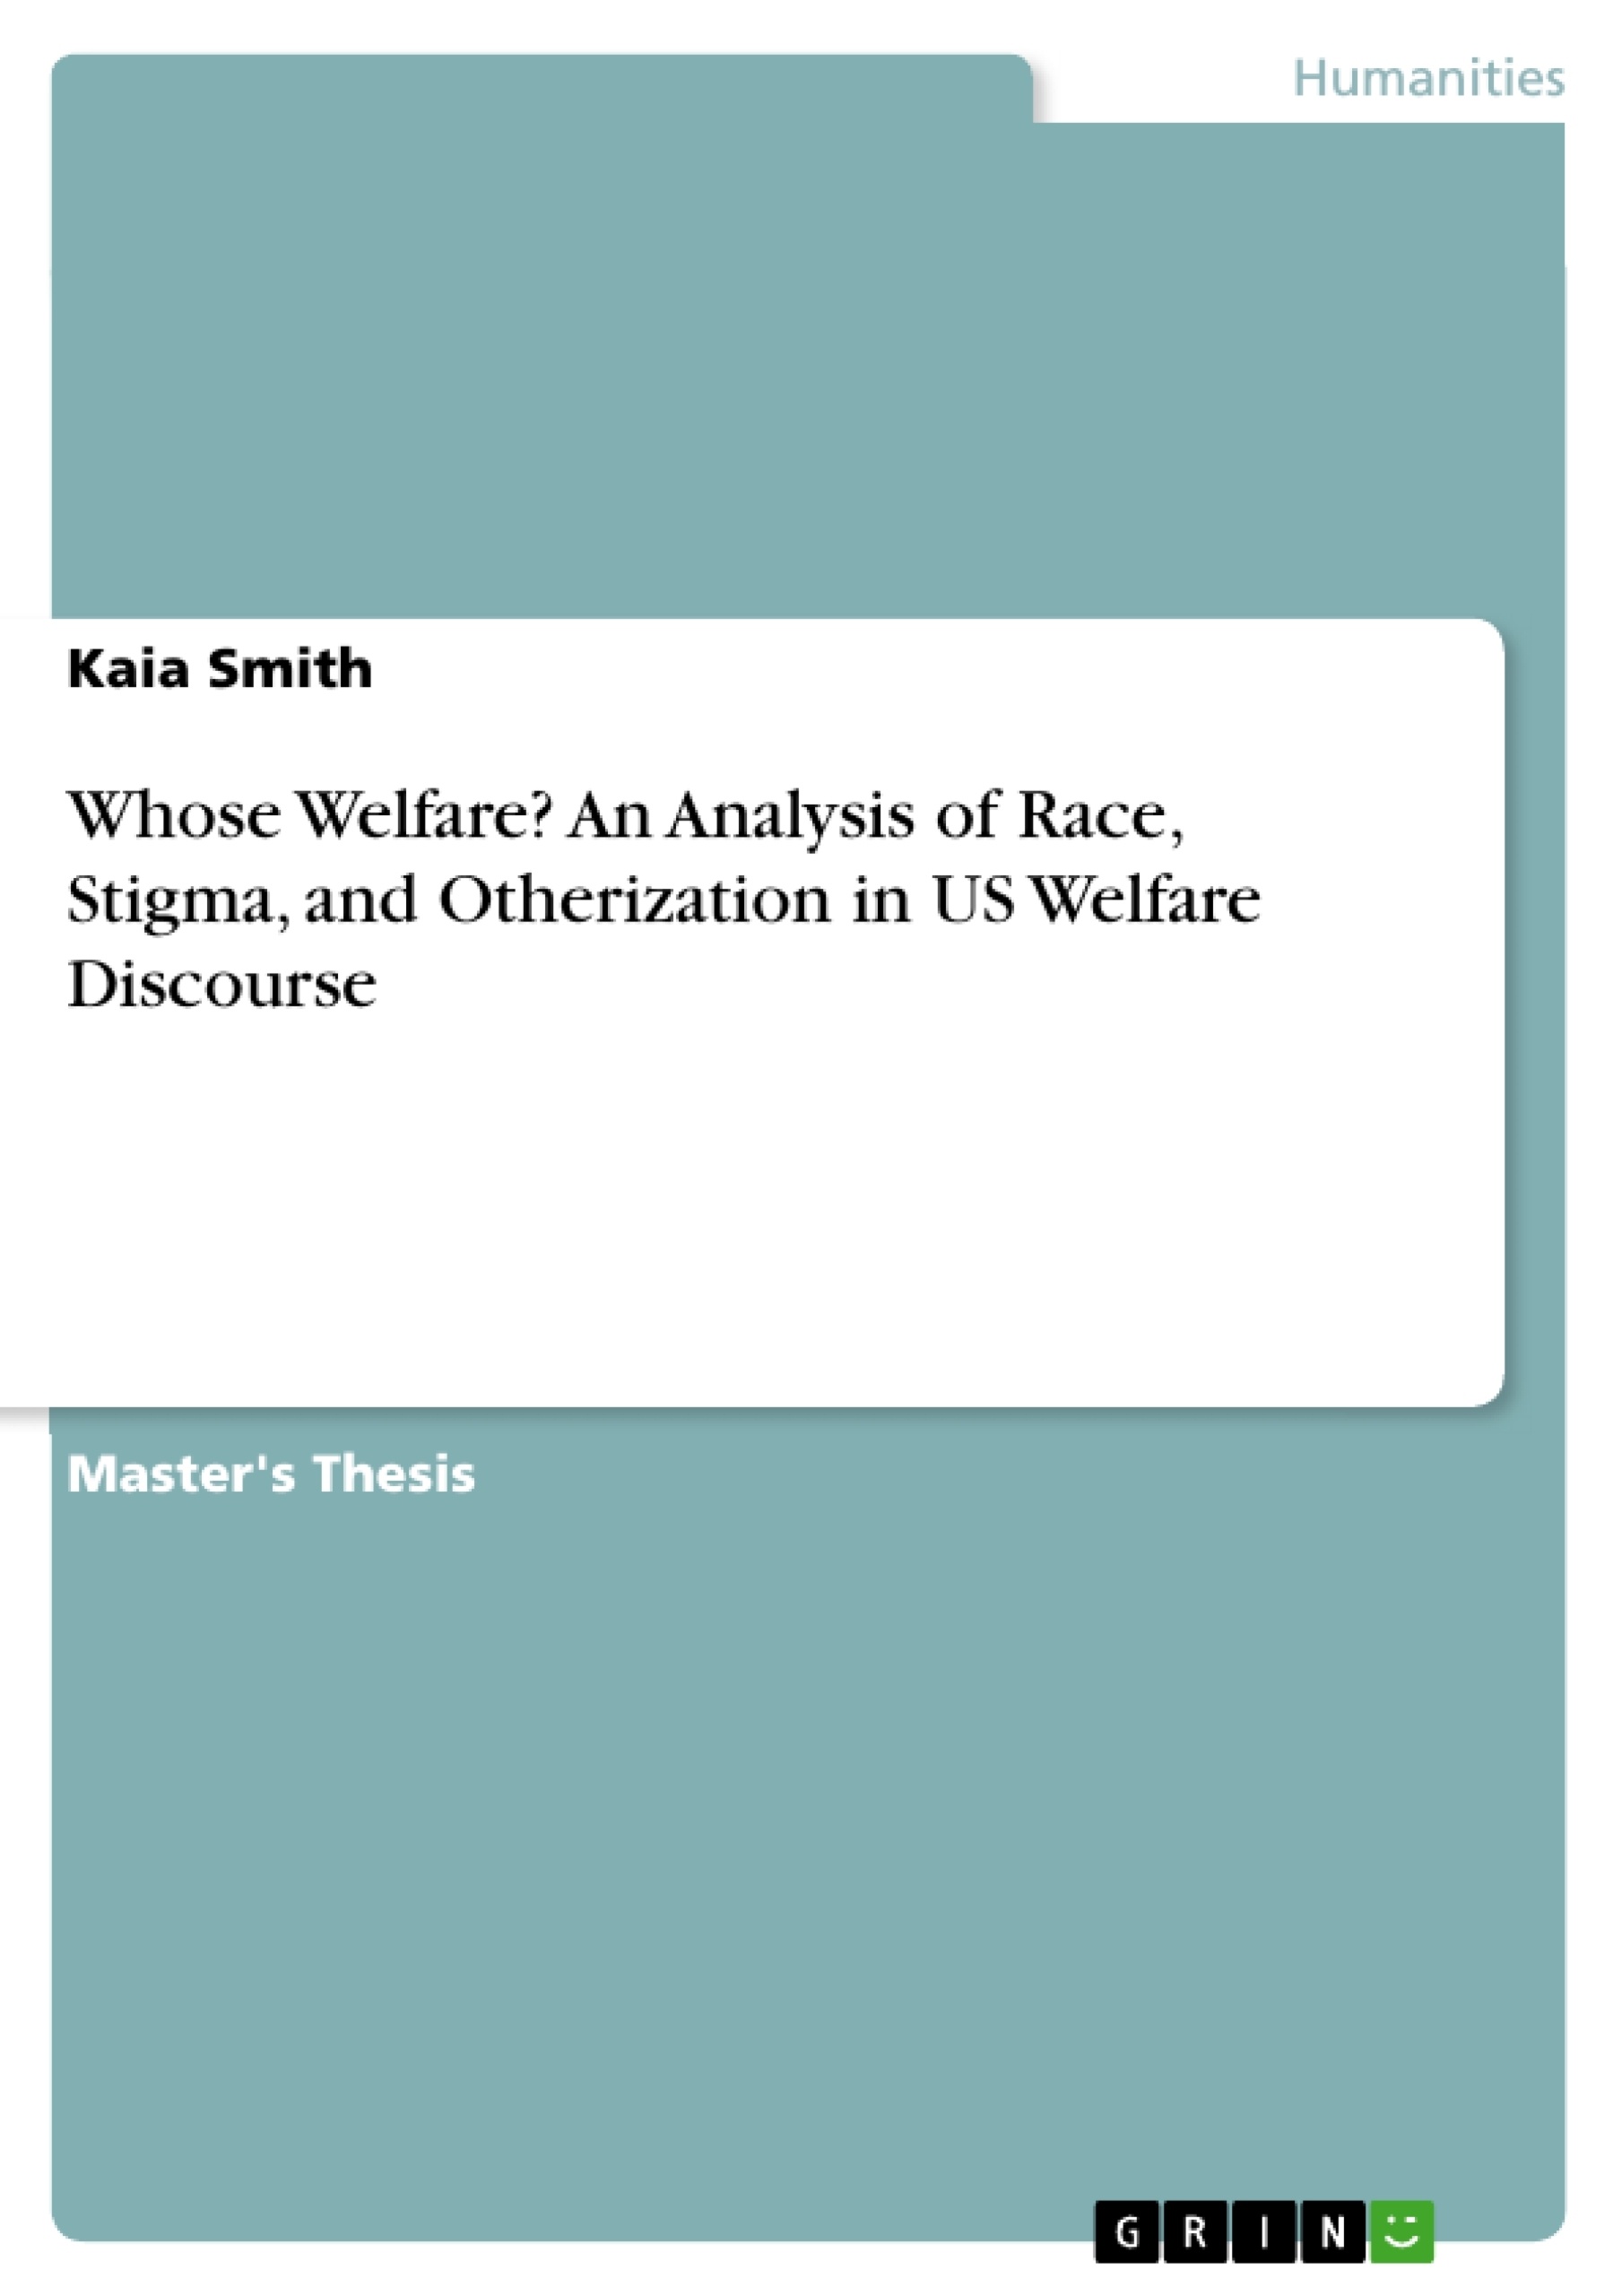 Title: Whose Welfare? An Analysis of Race, Stigma, and Otherization in US Welfare Discourse